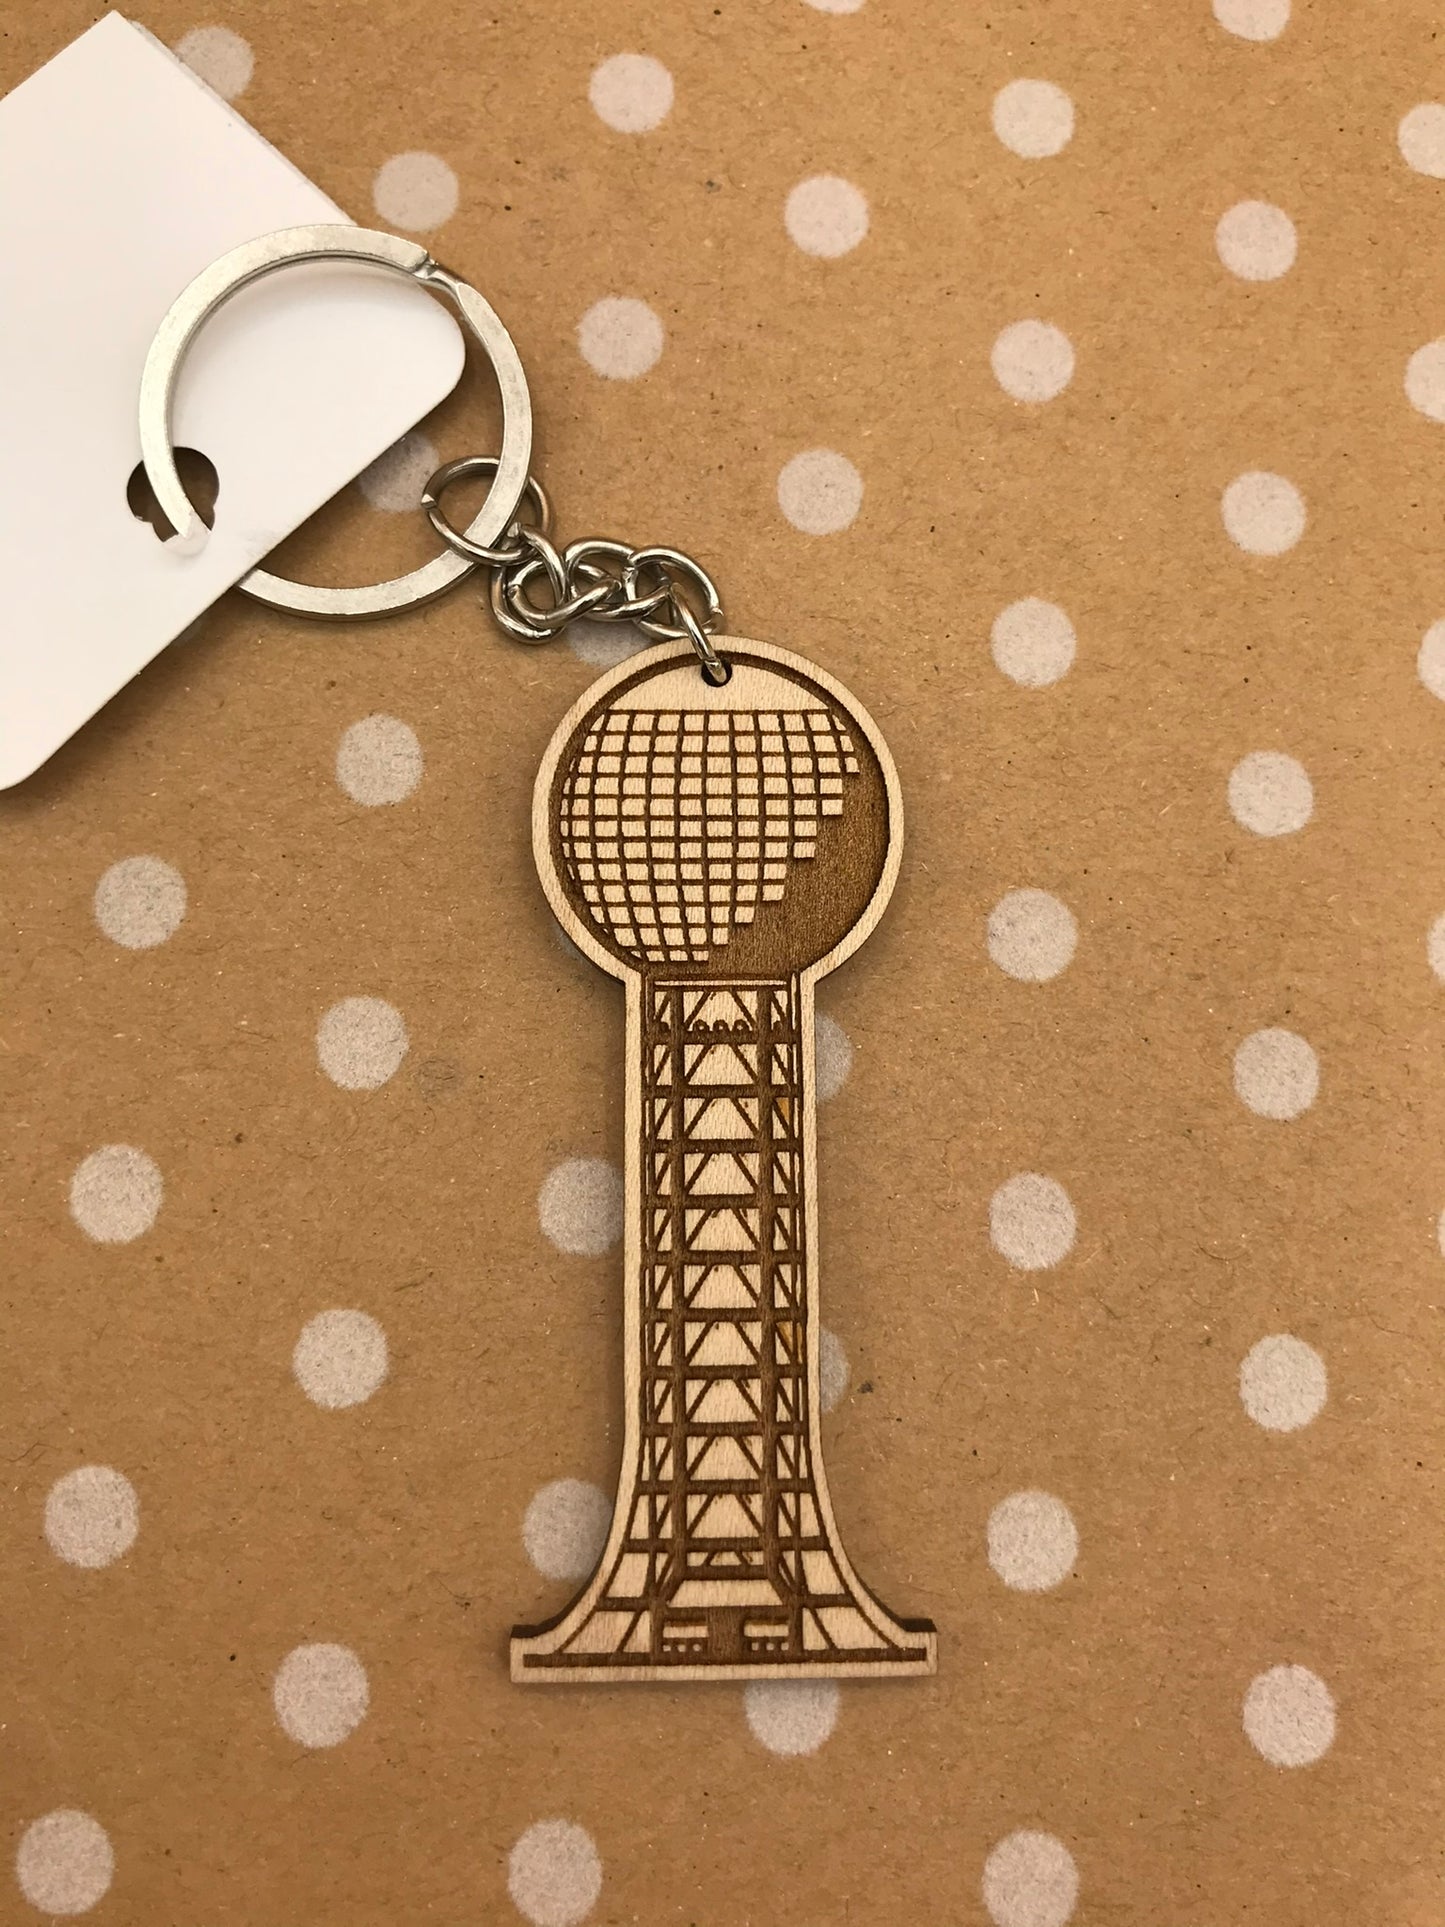 SoKno Woodworking Key Chains